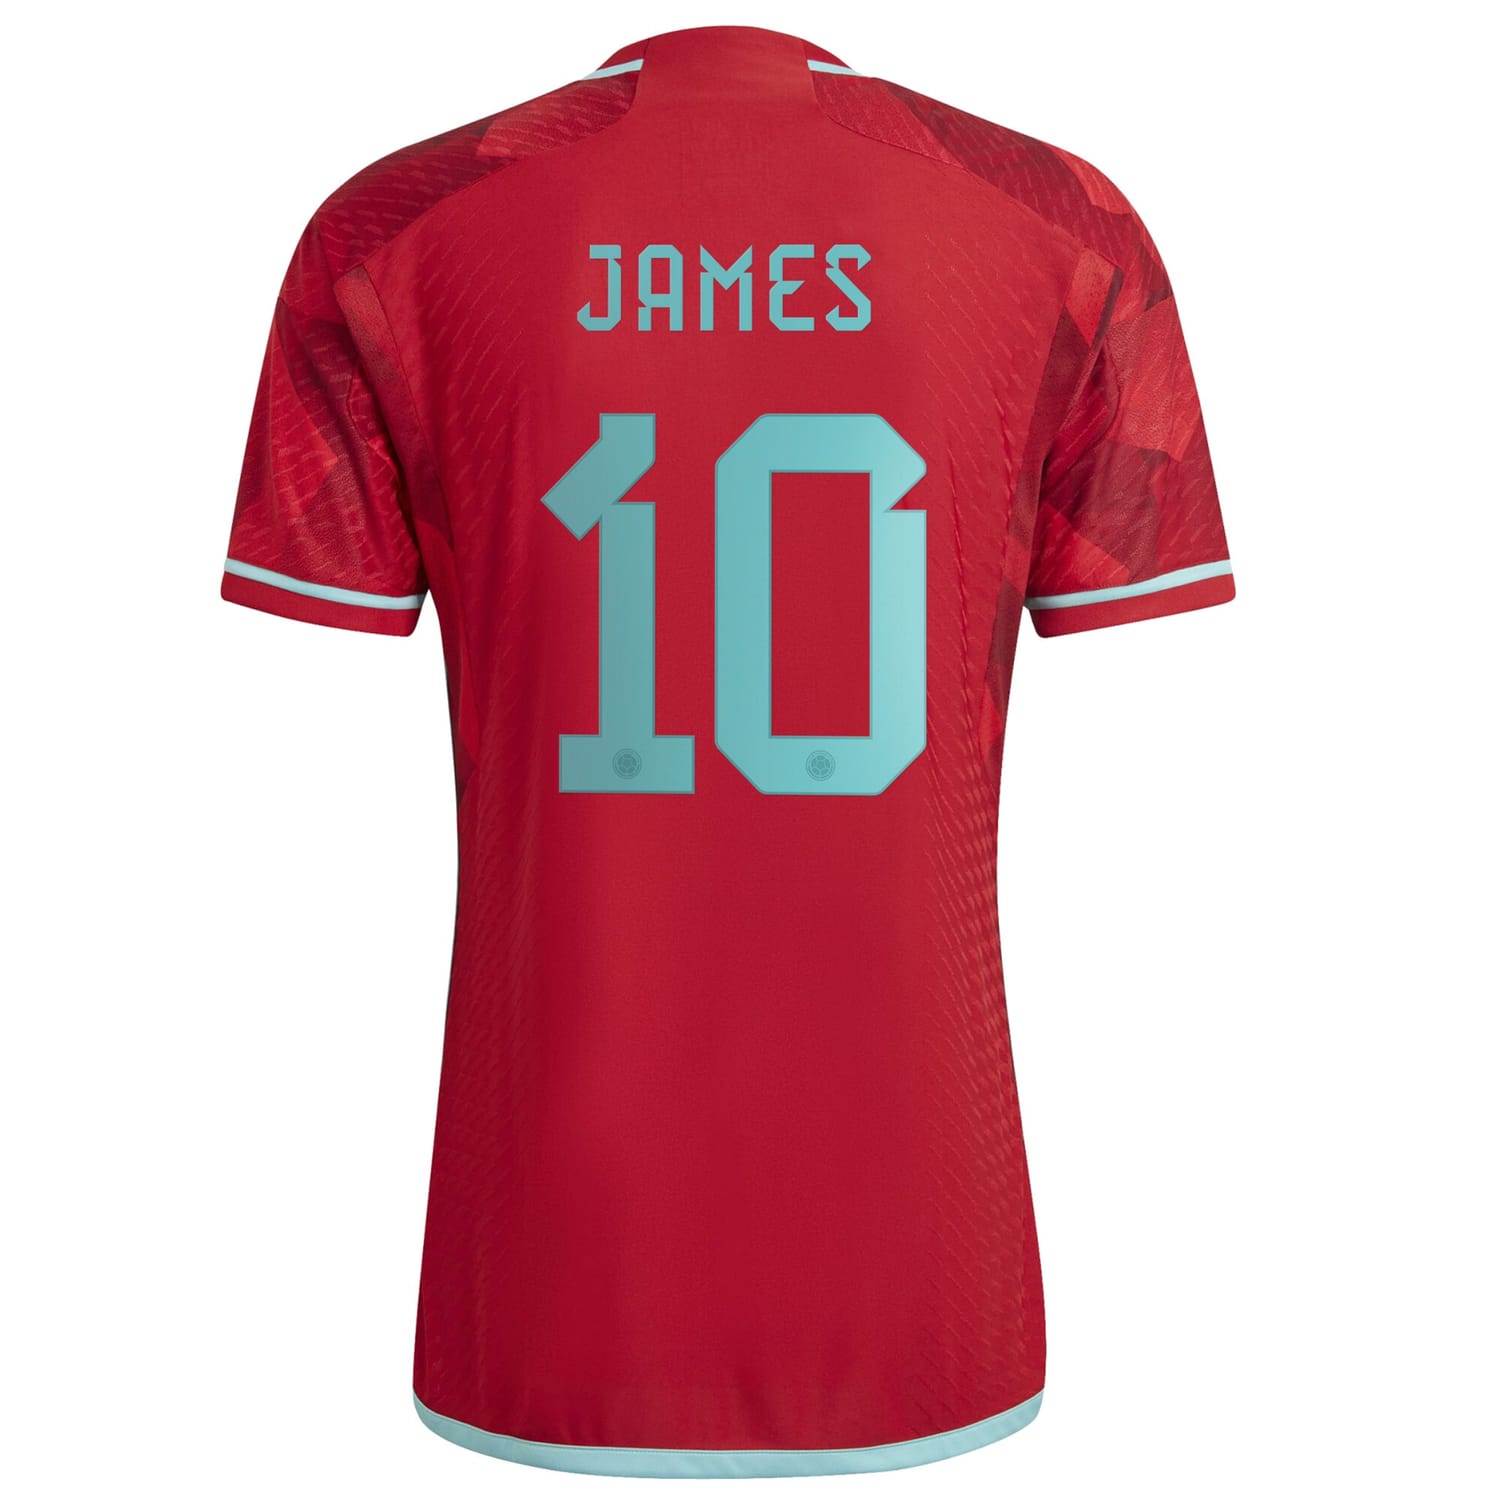 Colombia National Team Away Authentic Jersey Shirt Red 2022-23 player James Rodriguez printing for Men